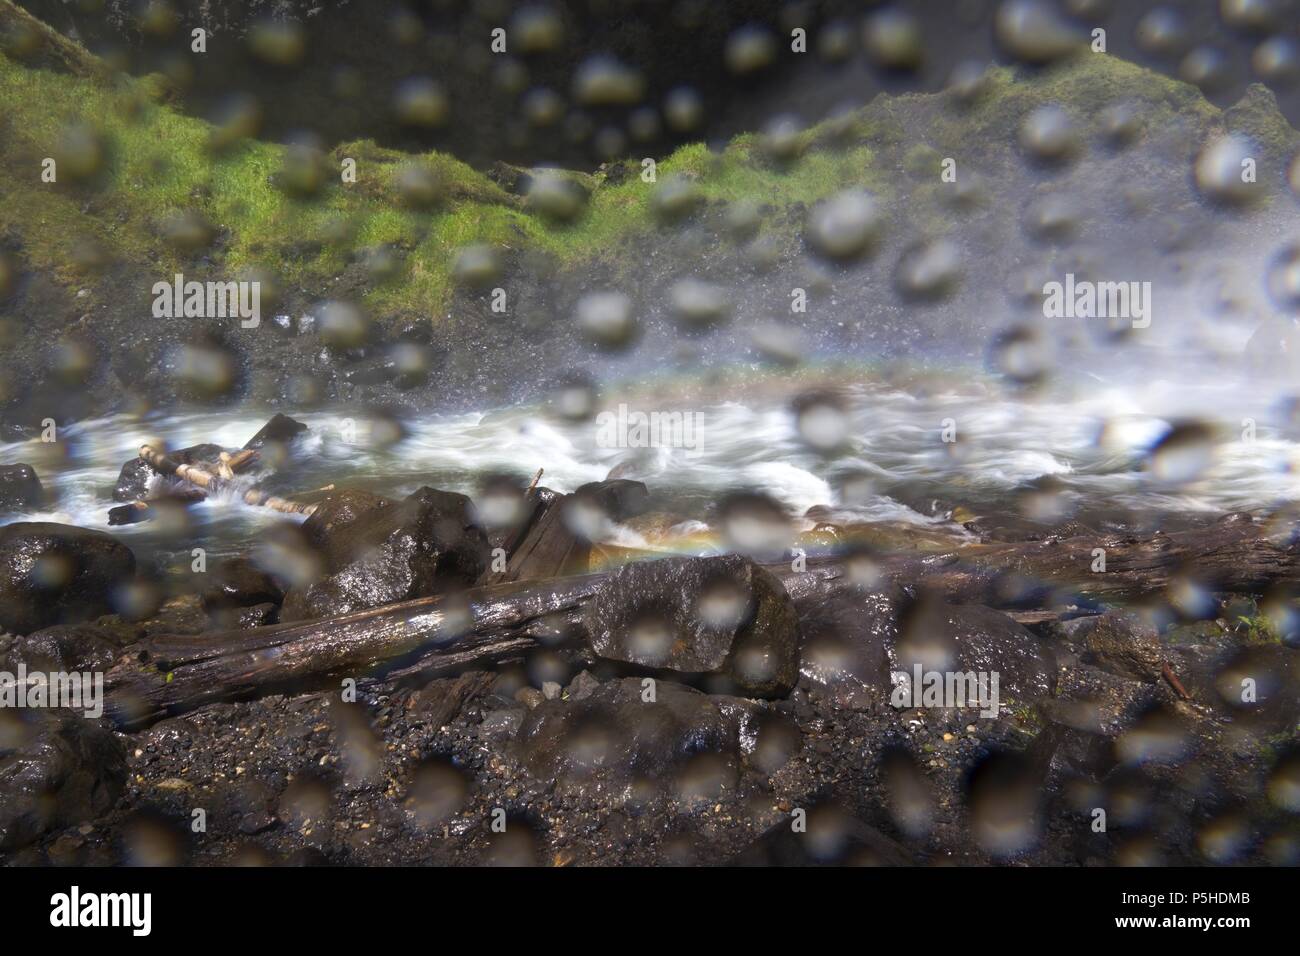 Water Drops Spray collecting on wet digital photography camera lens creating surreal blurred liquid background effect Stock Photo